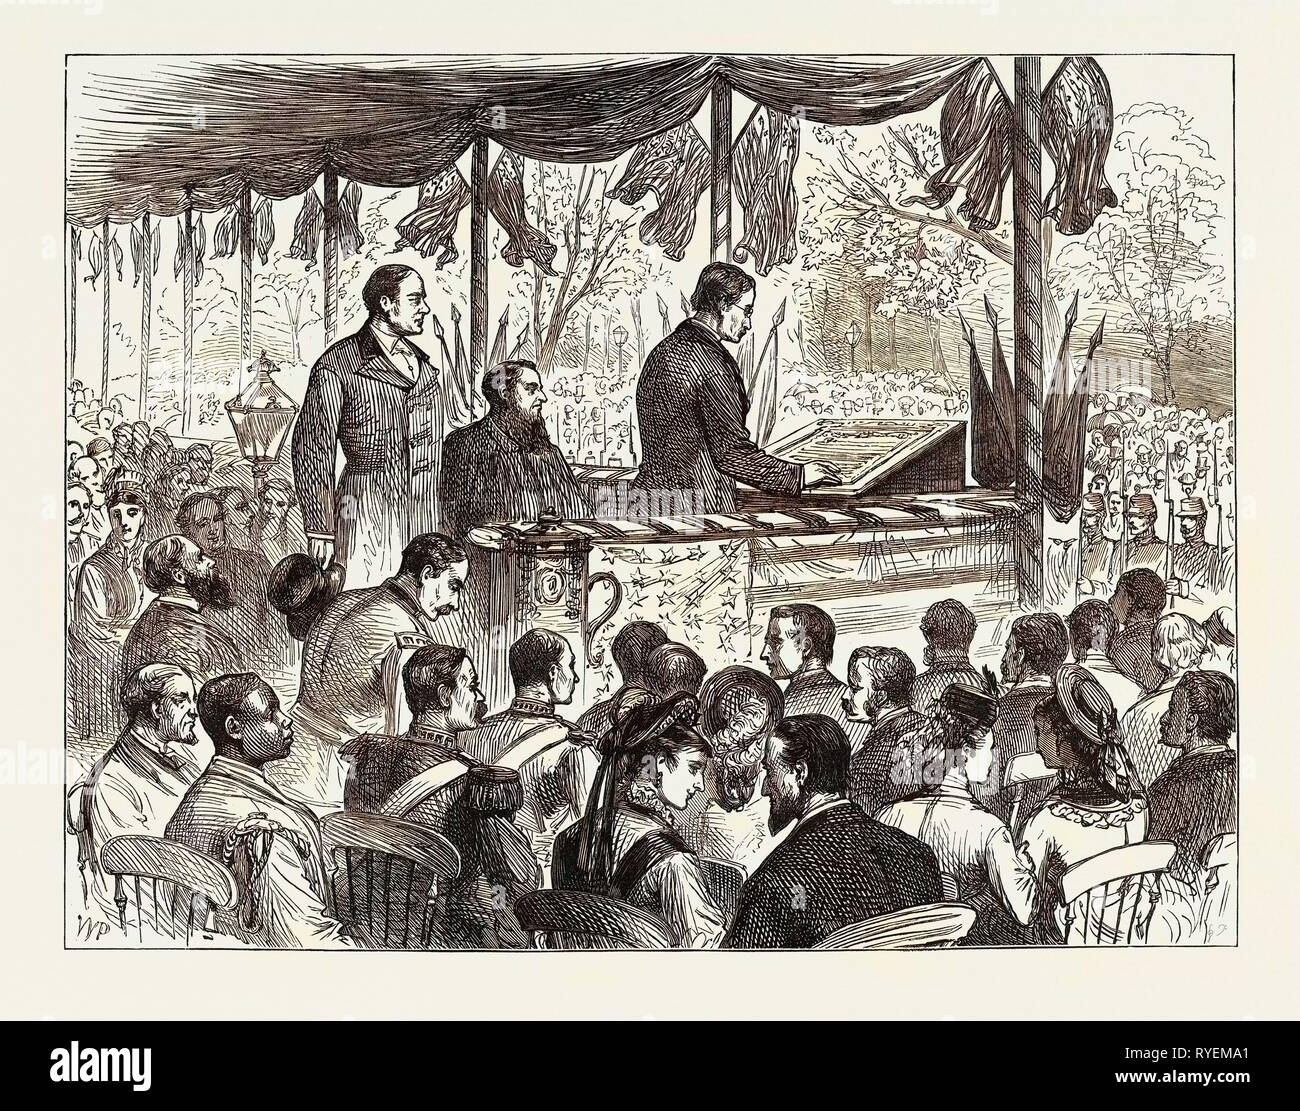 The Centennial Celebration of American Independence: The Fourth of July in Philadelphia: Mr. Richard Henry Lee Reading the Original Document of the Declaration of Independence. 1876 Stock Photo